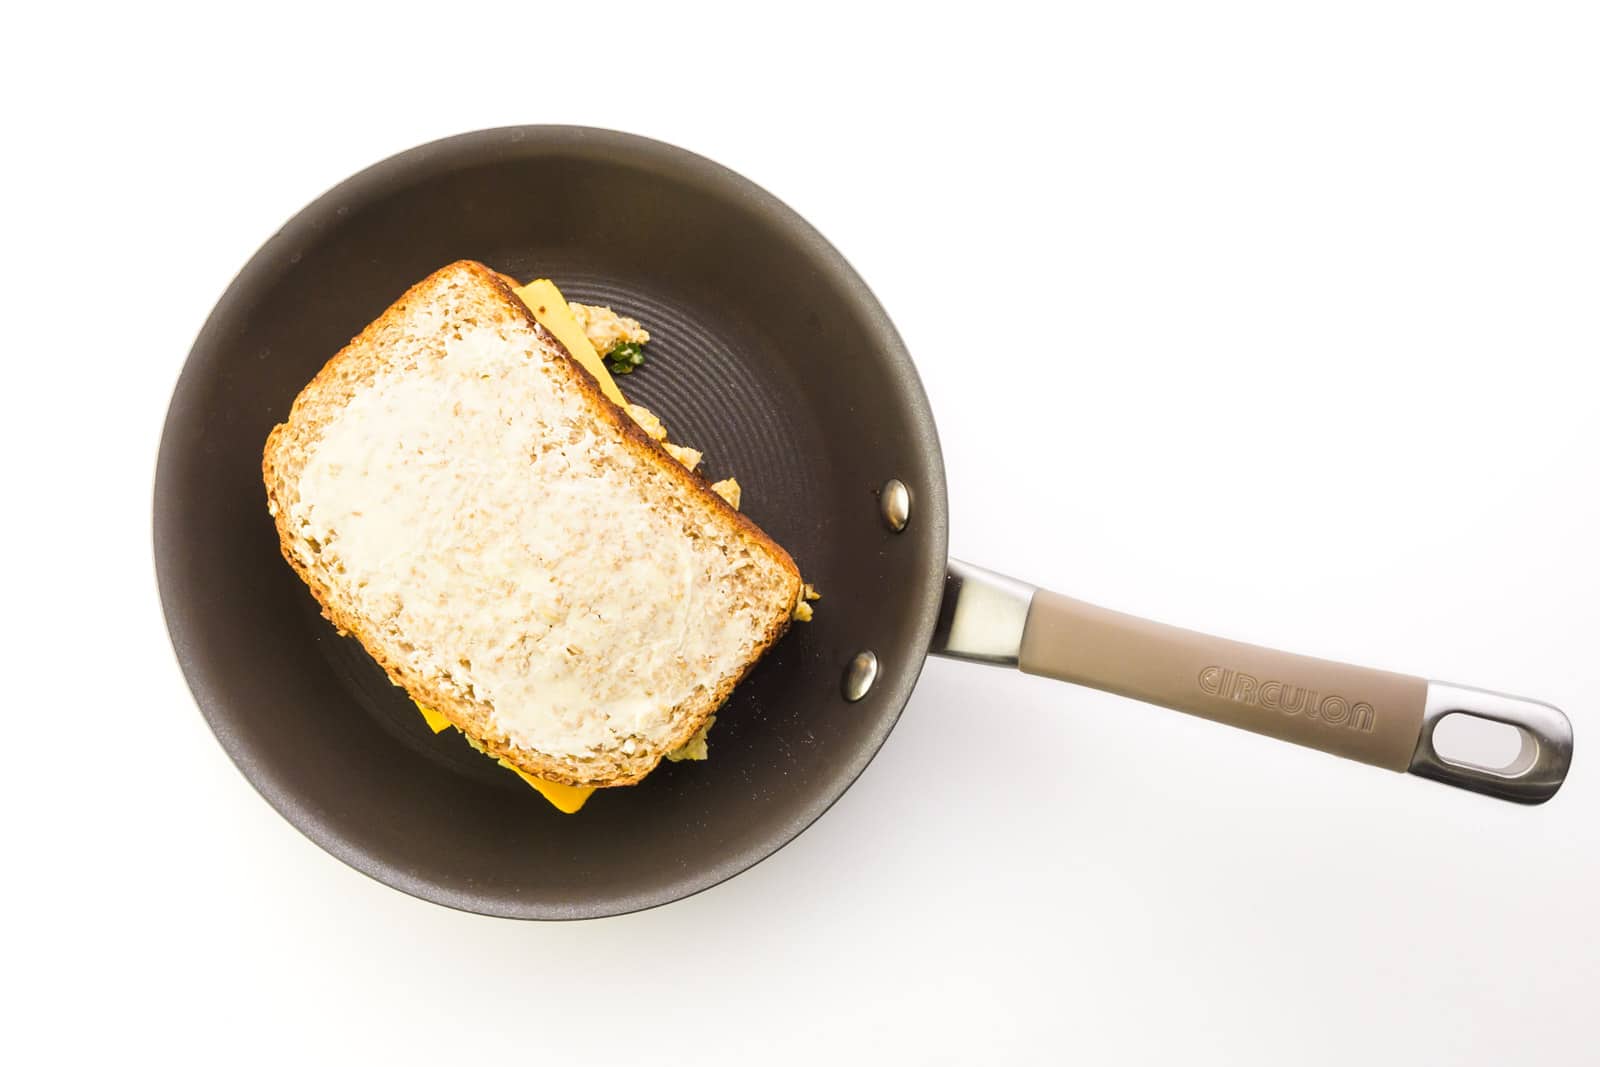 A skillet holds a sandwich with buttered bread on top.